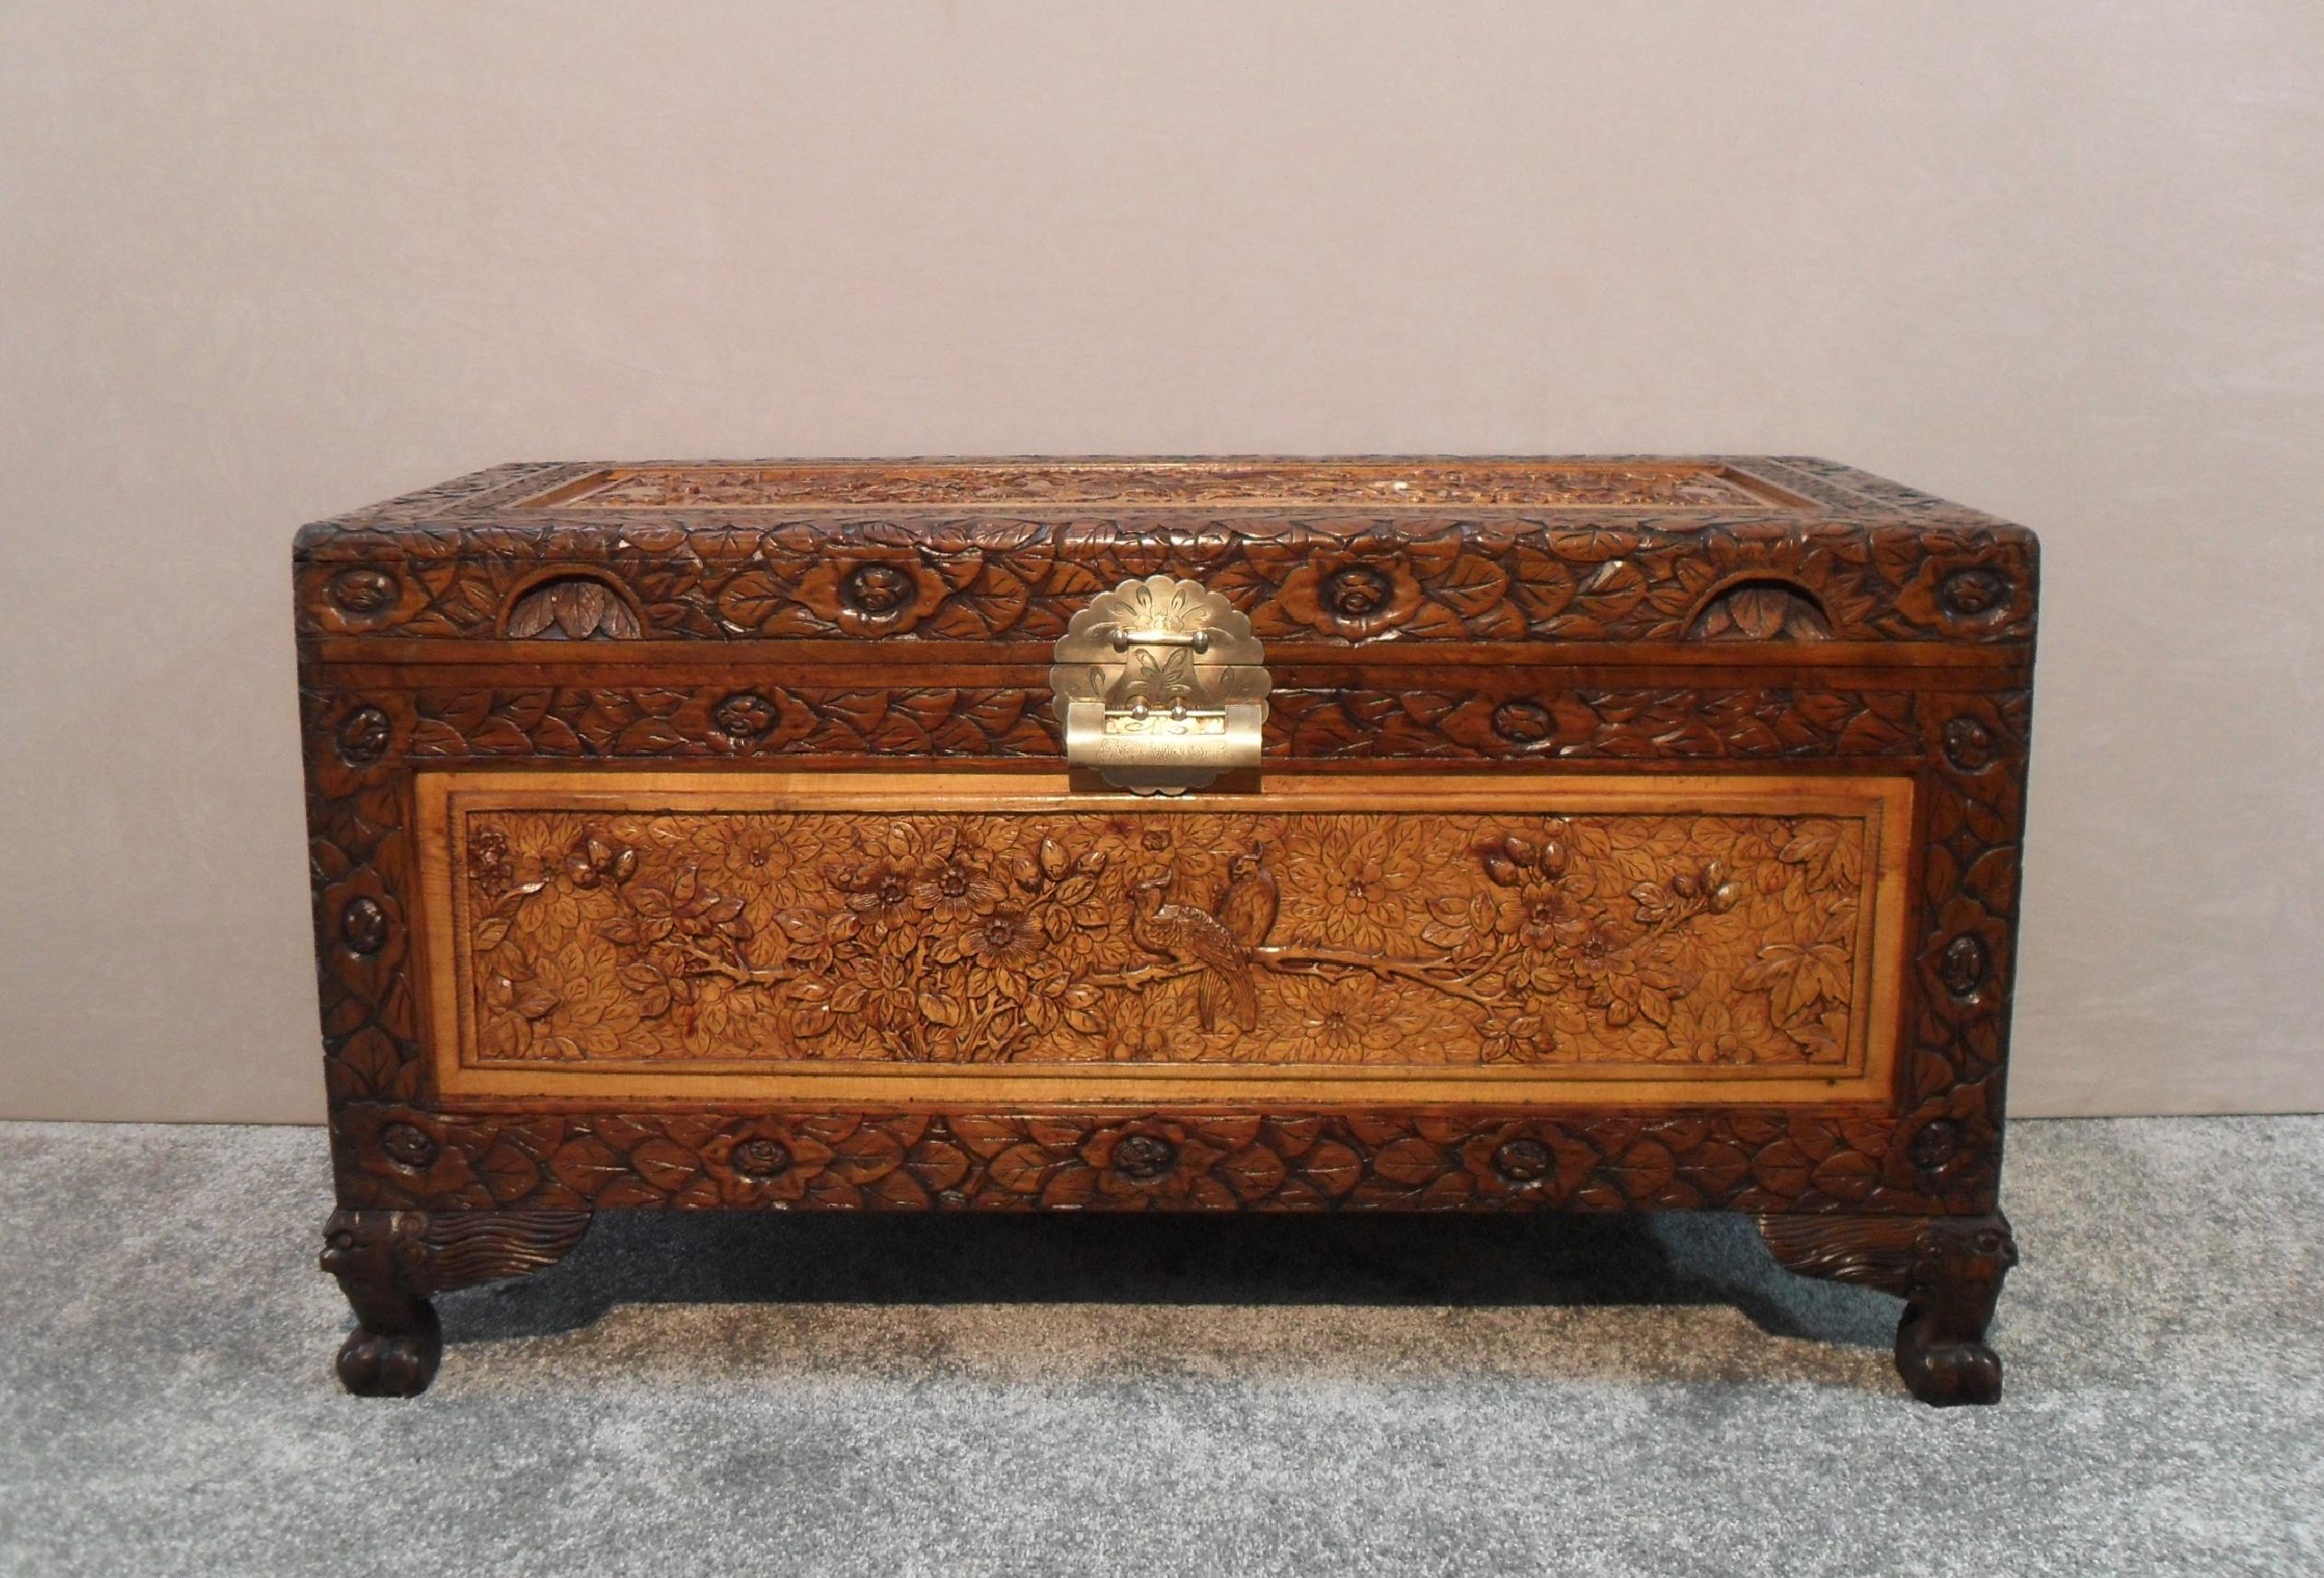 An extremely good quality Oriental freestanding teak chest with beautifully carved inset maple panels of birds and flowers to all four sides and top stood on cabriole feet. The chest retains it original engraved brass back plate and latch and comes